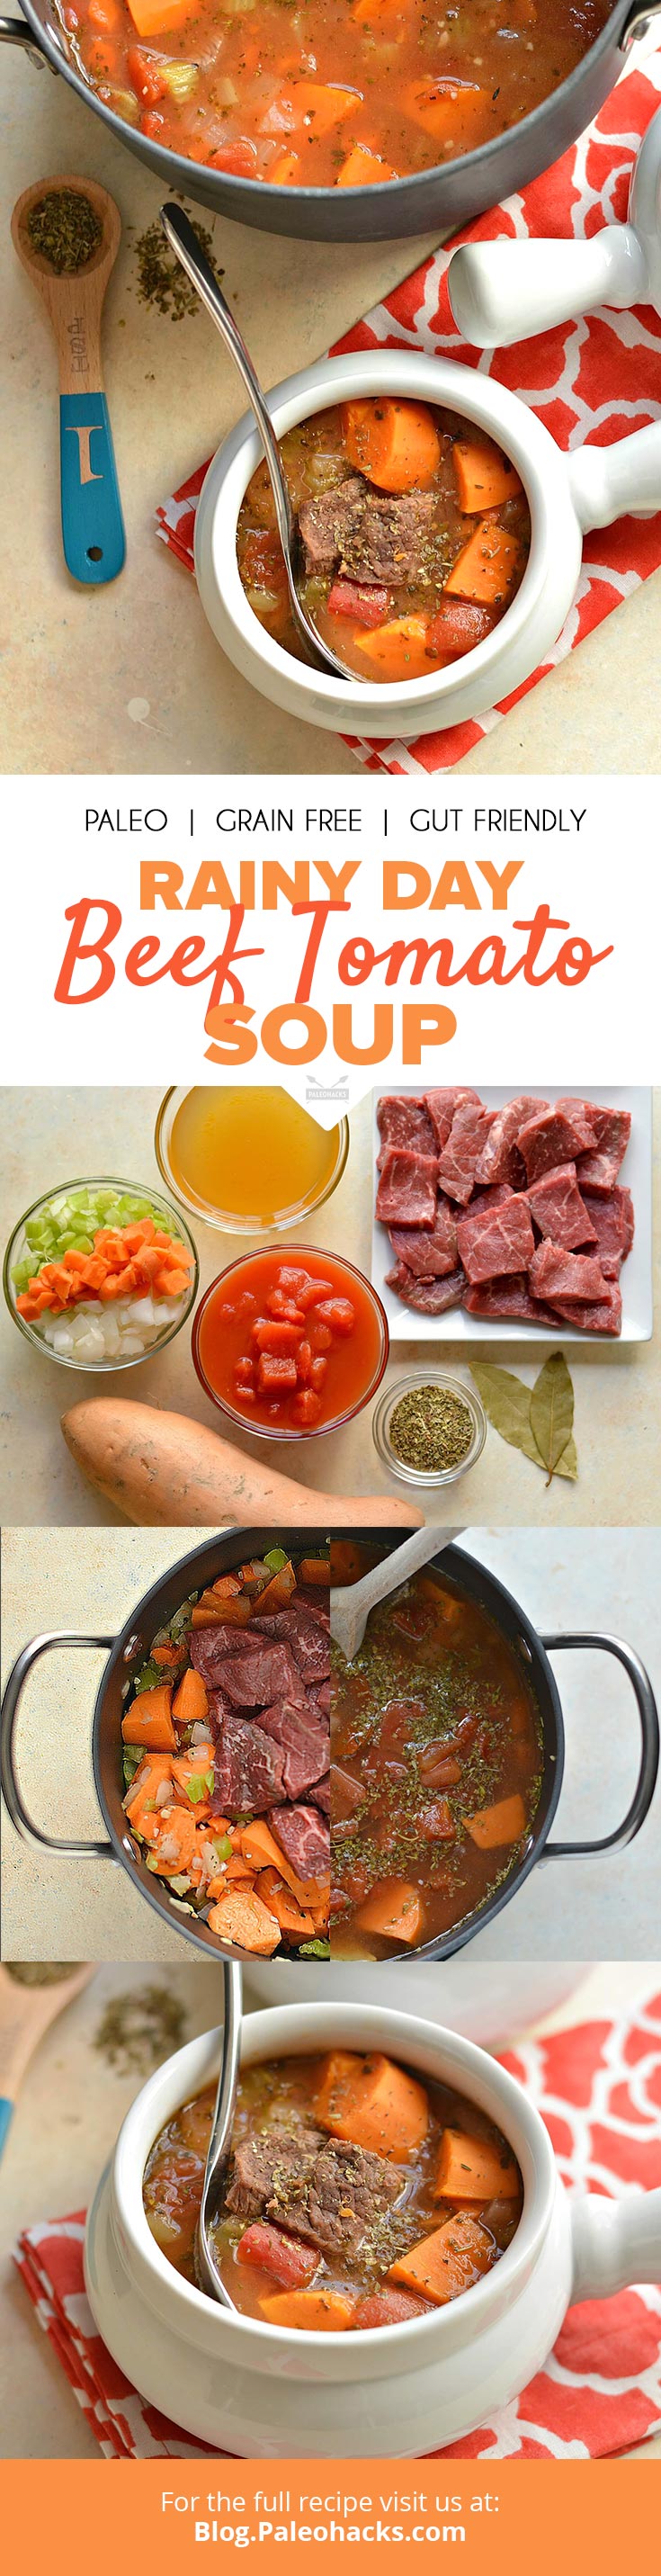 Paleo Soup Recipe with Beef